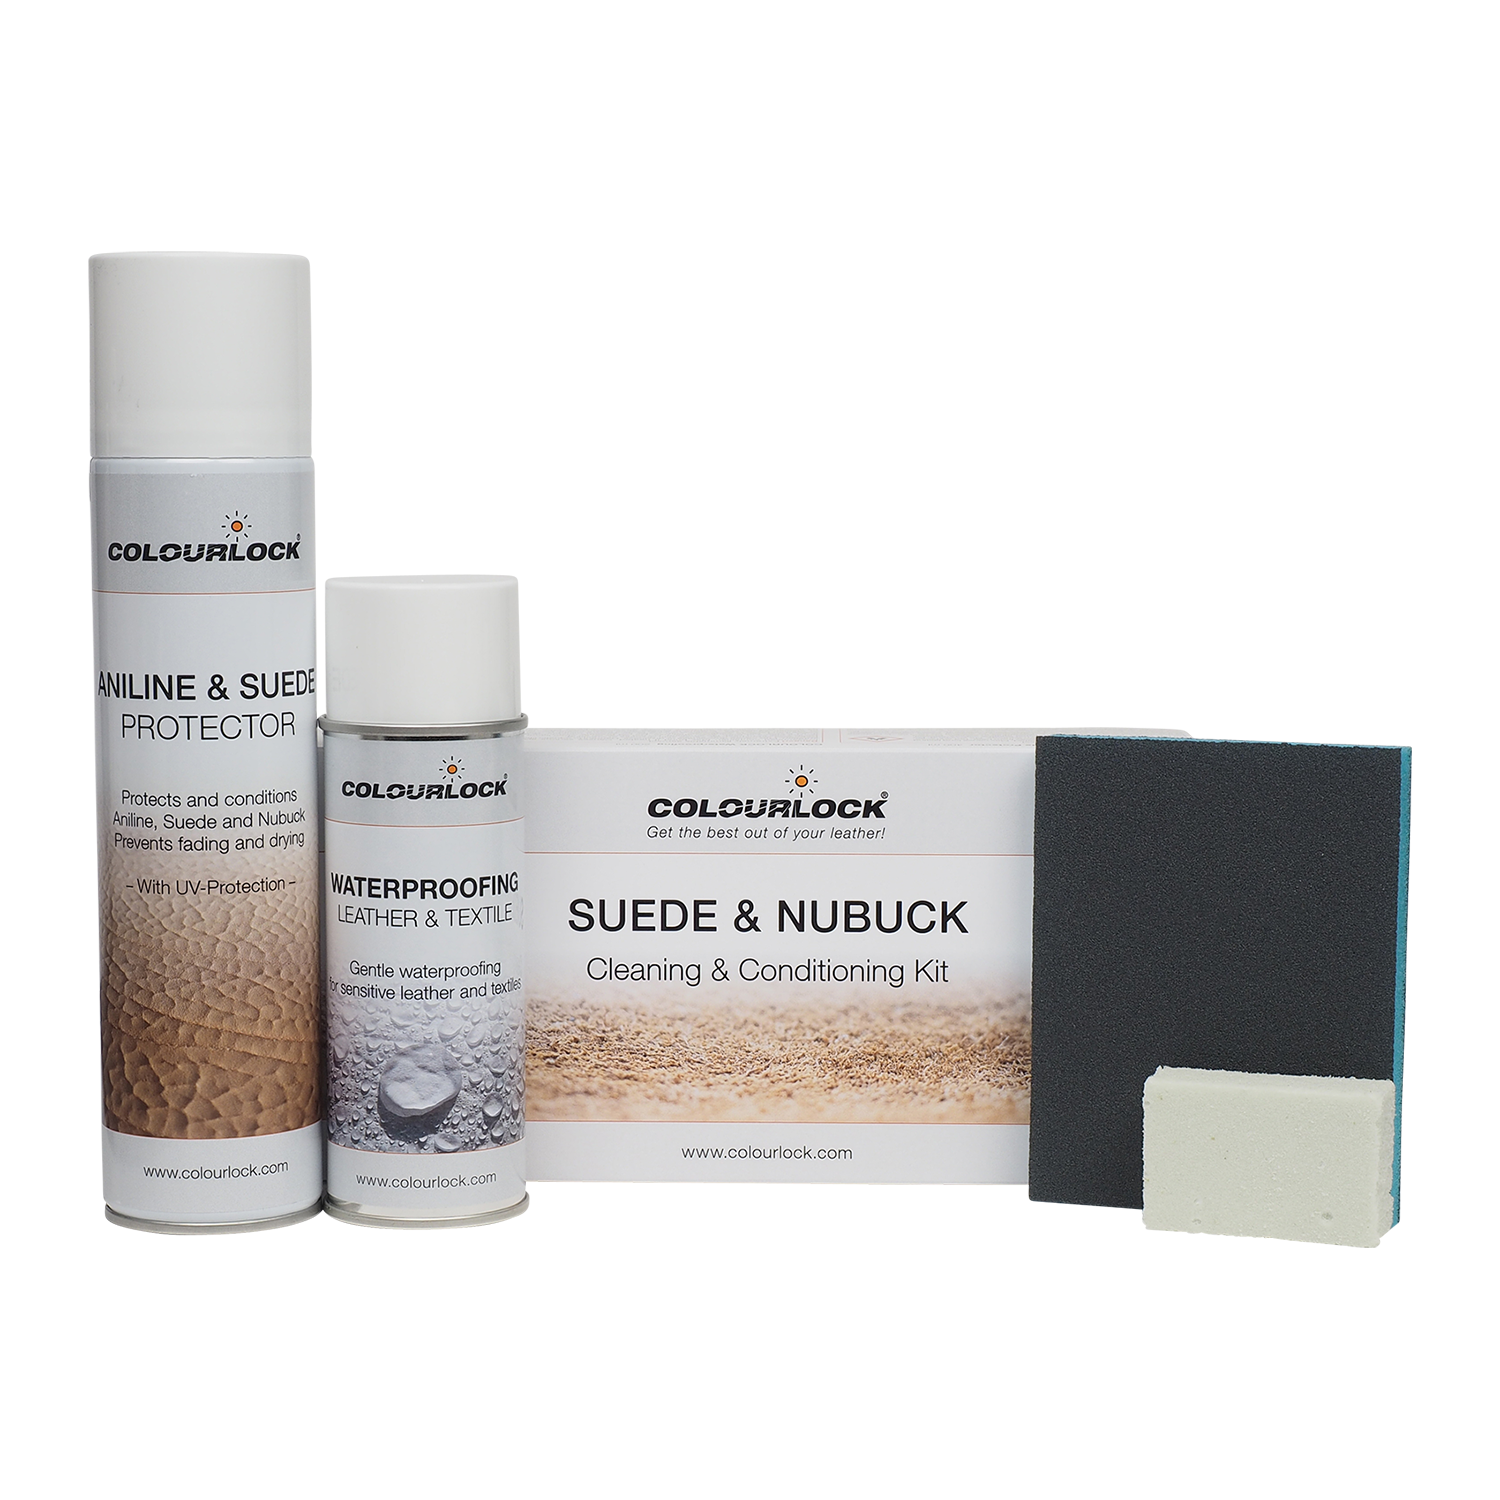 Colourlock Suede & Nubuck Cleaning & Conditioning Kit